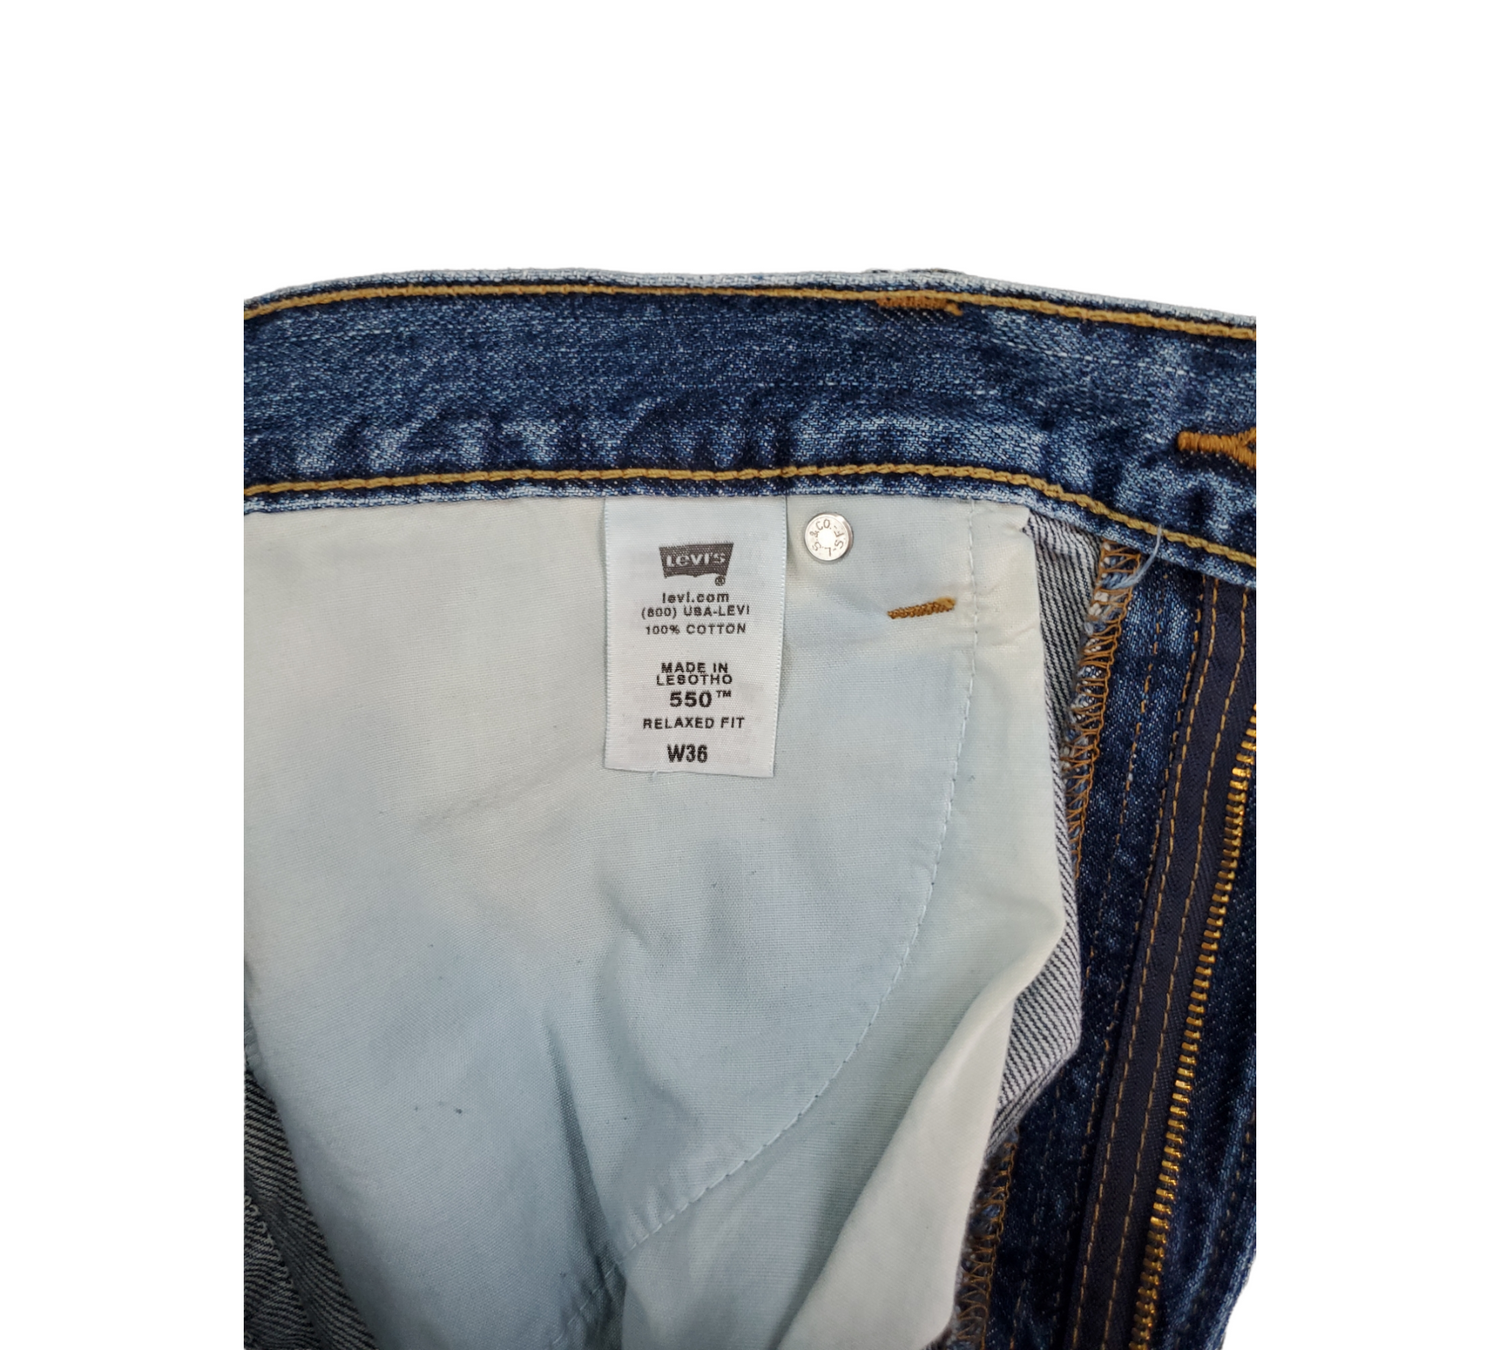 Levi's 550 Relaxed Fit Bermuda Shorts Size 36 | Popular brands used clothing